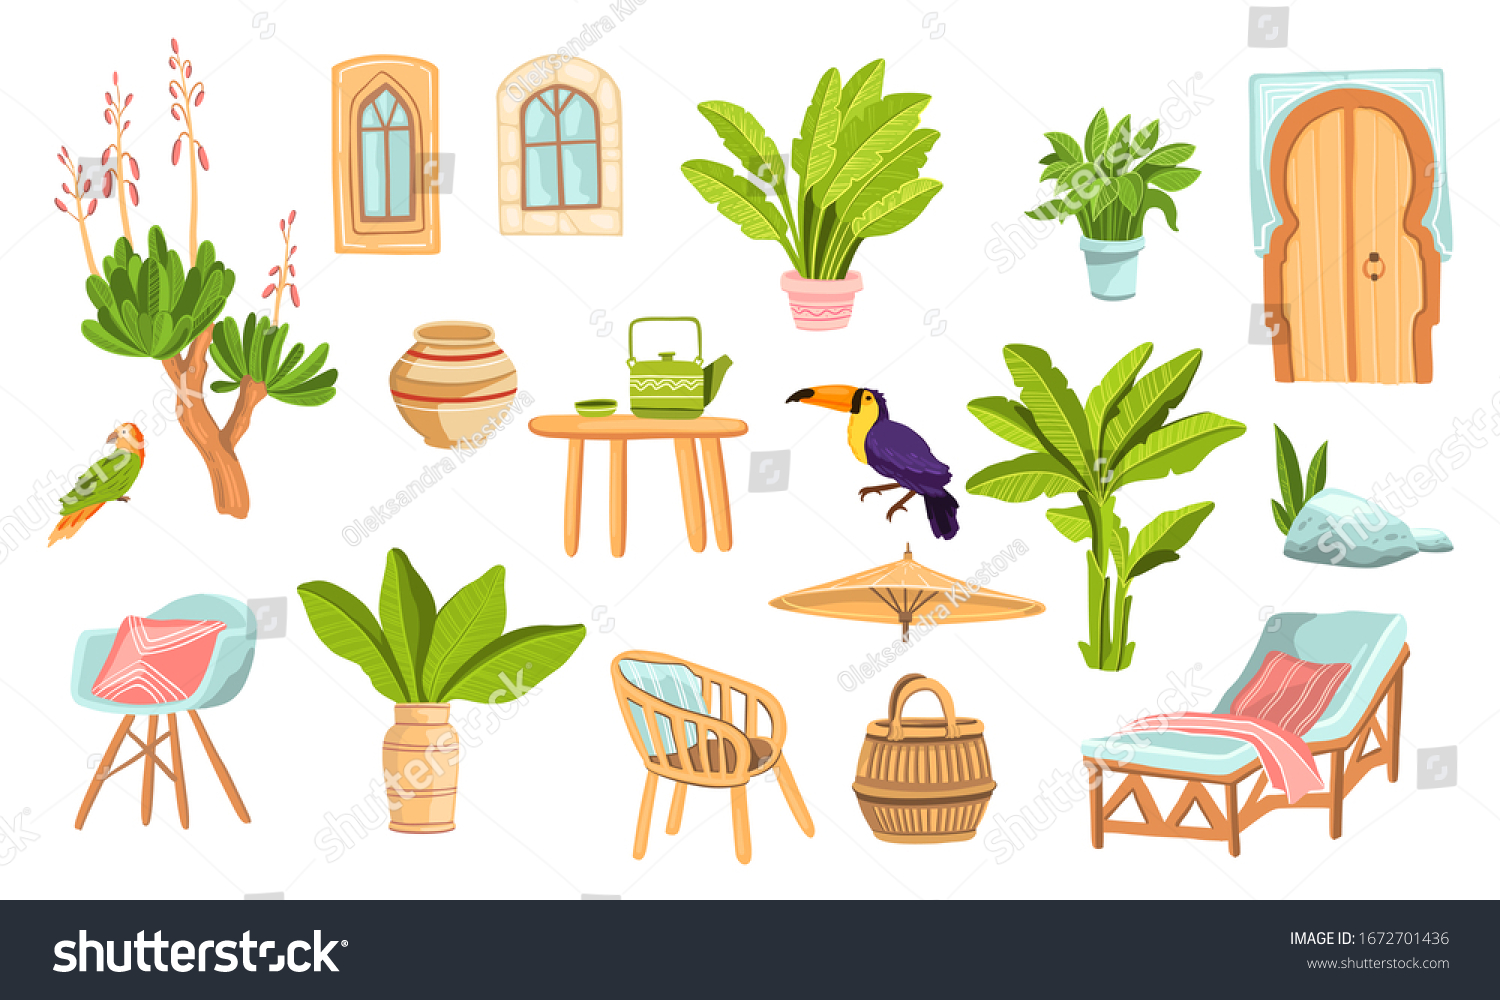 SVG of Summer exotic set with backyard cane furniture, tropical and houseplants, windows, doors, toucan, parrot. Morocco hand drawn collection isolated on white. Colorful design elements for prints, flyers svg